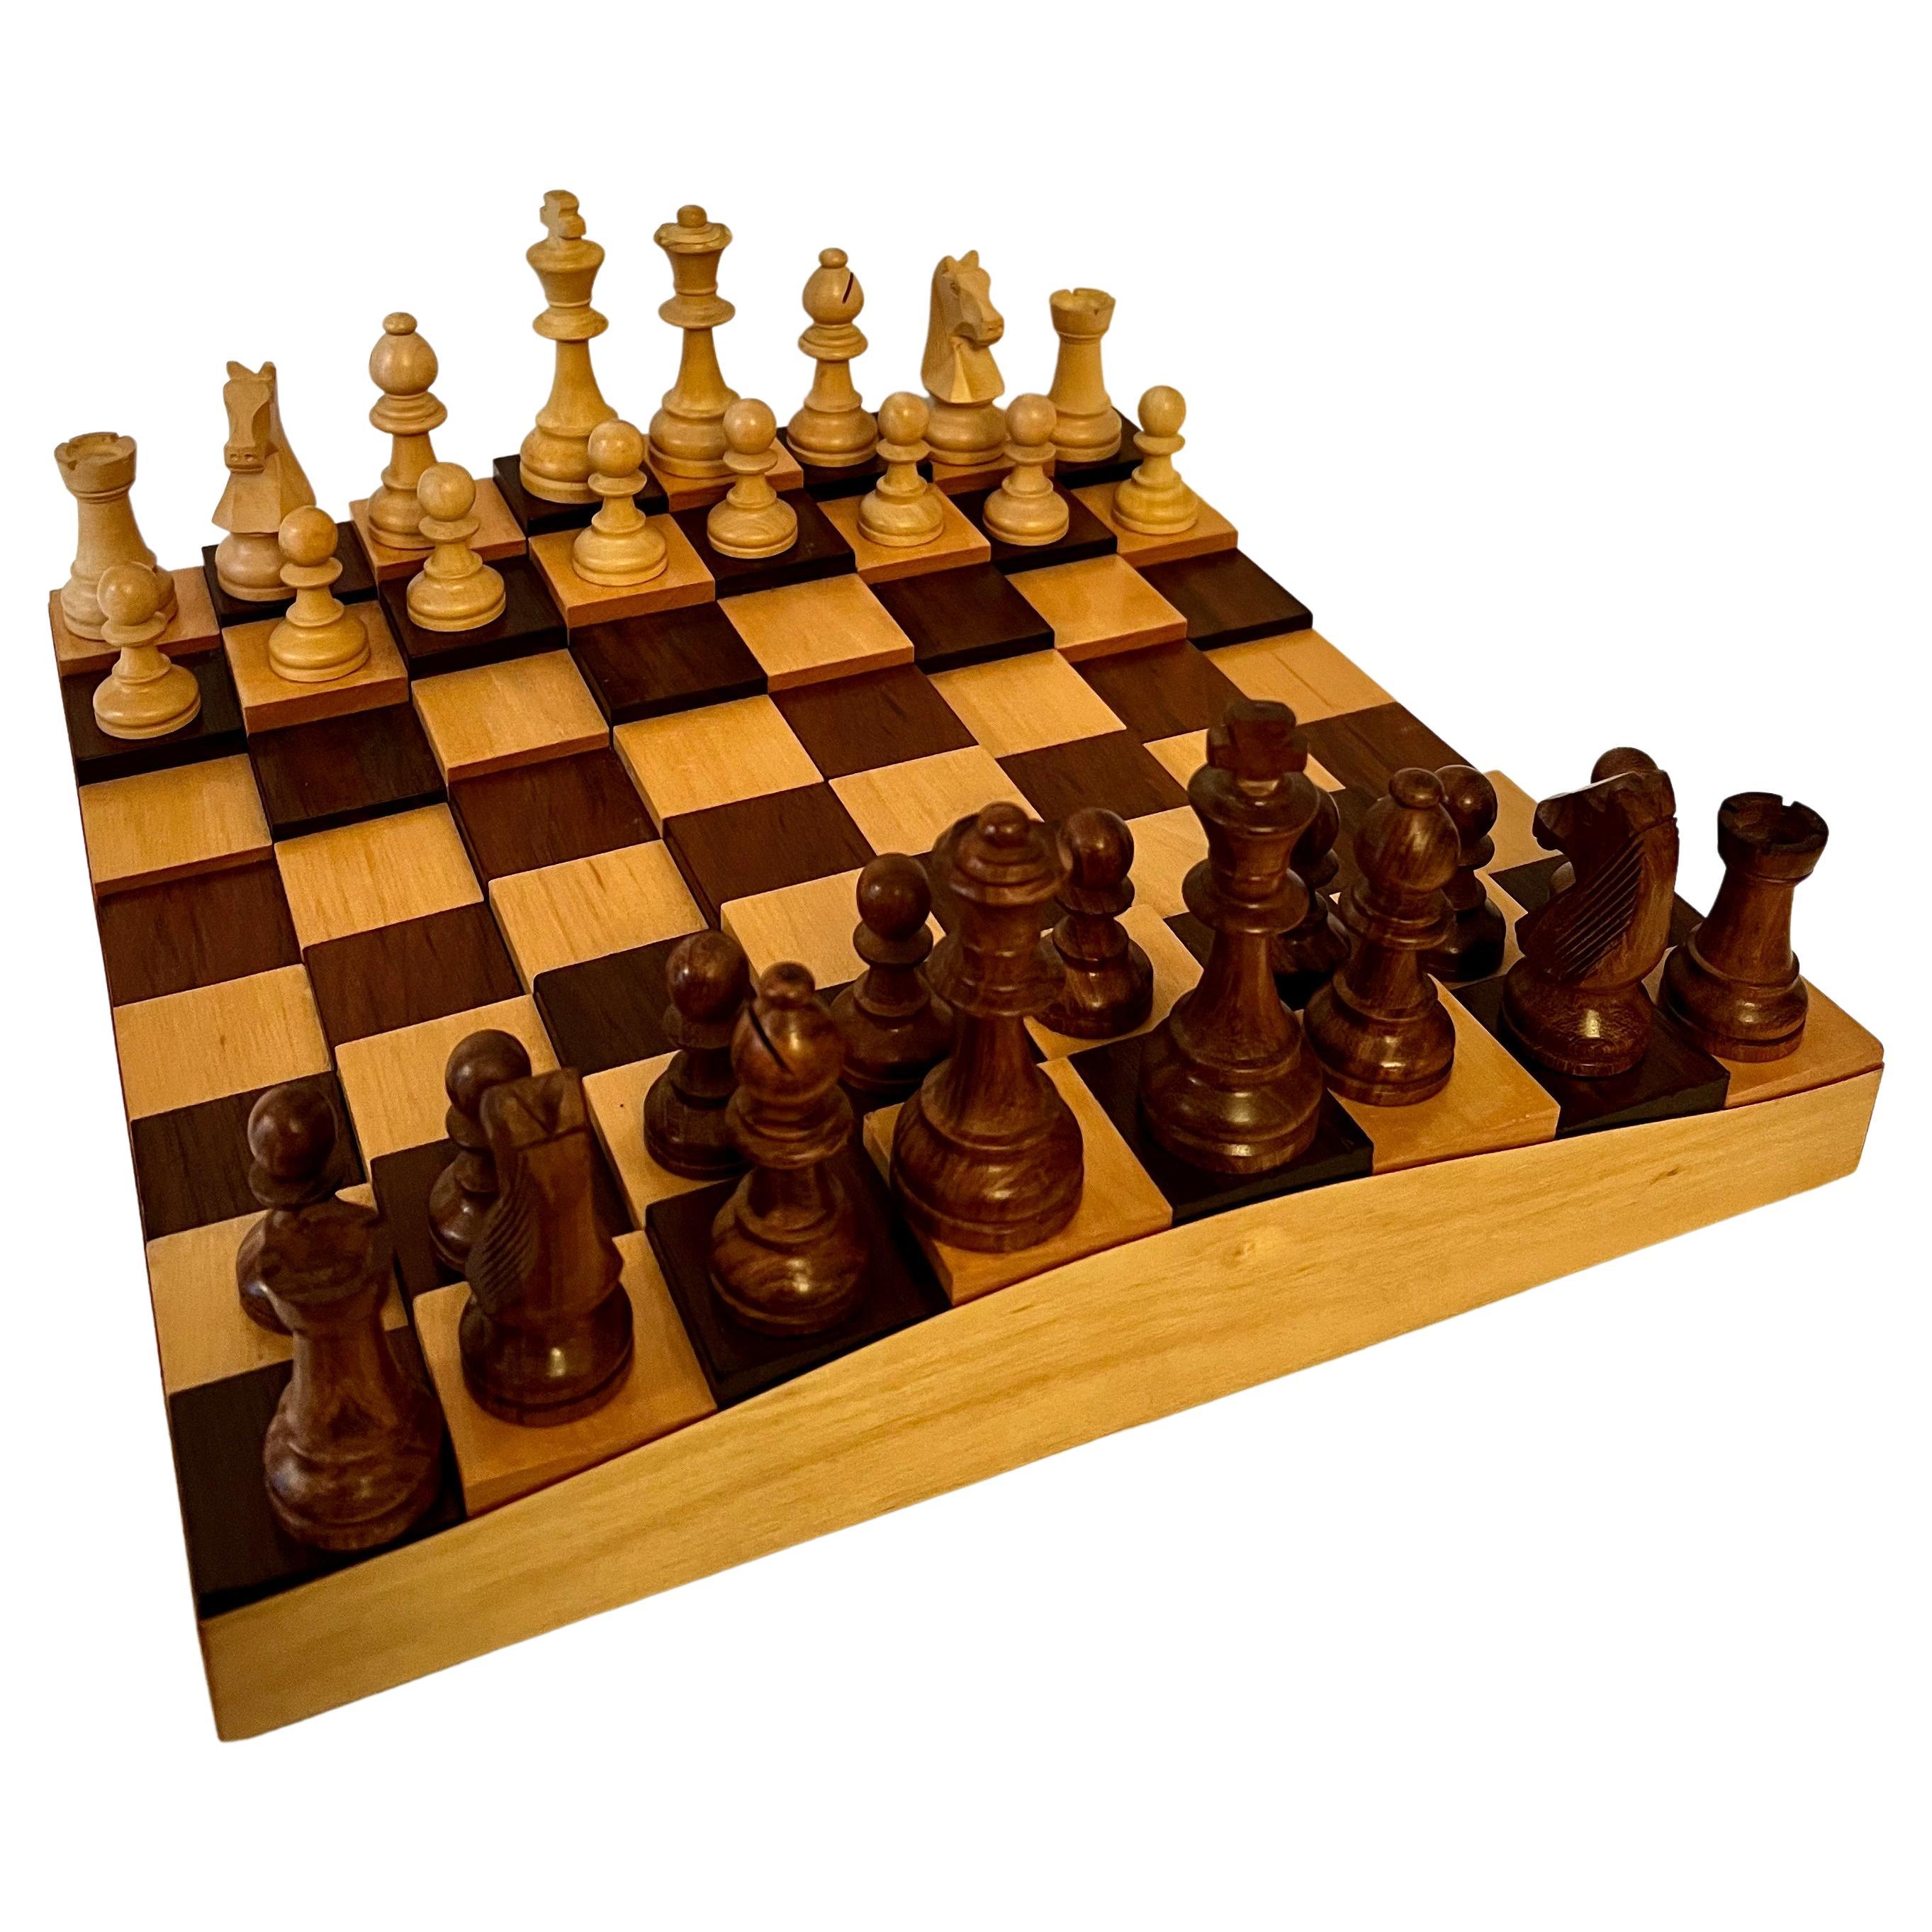 3 Dimensional Wooden Chess or Checker Board with Chess Players